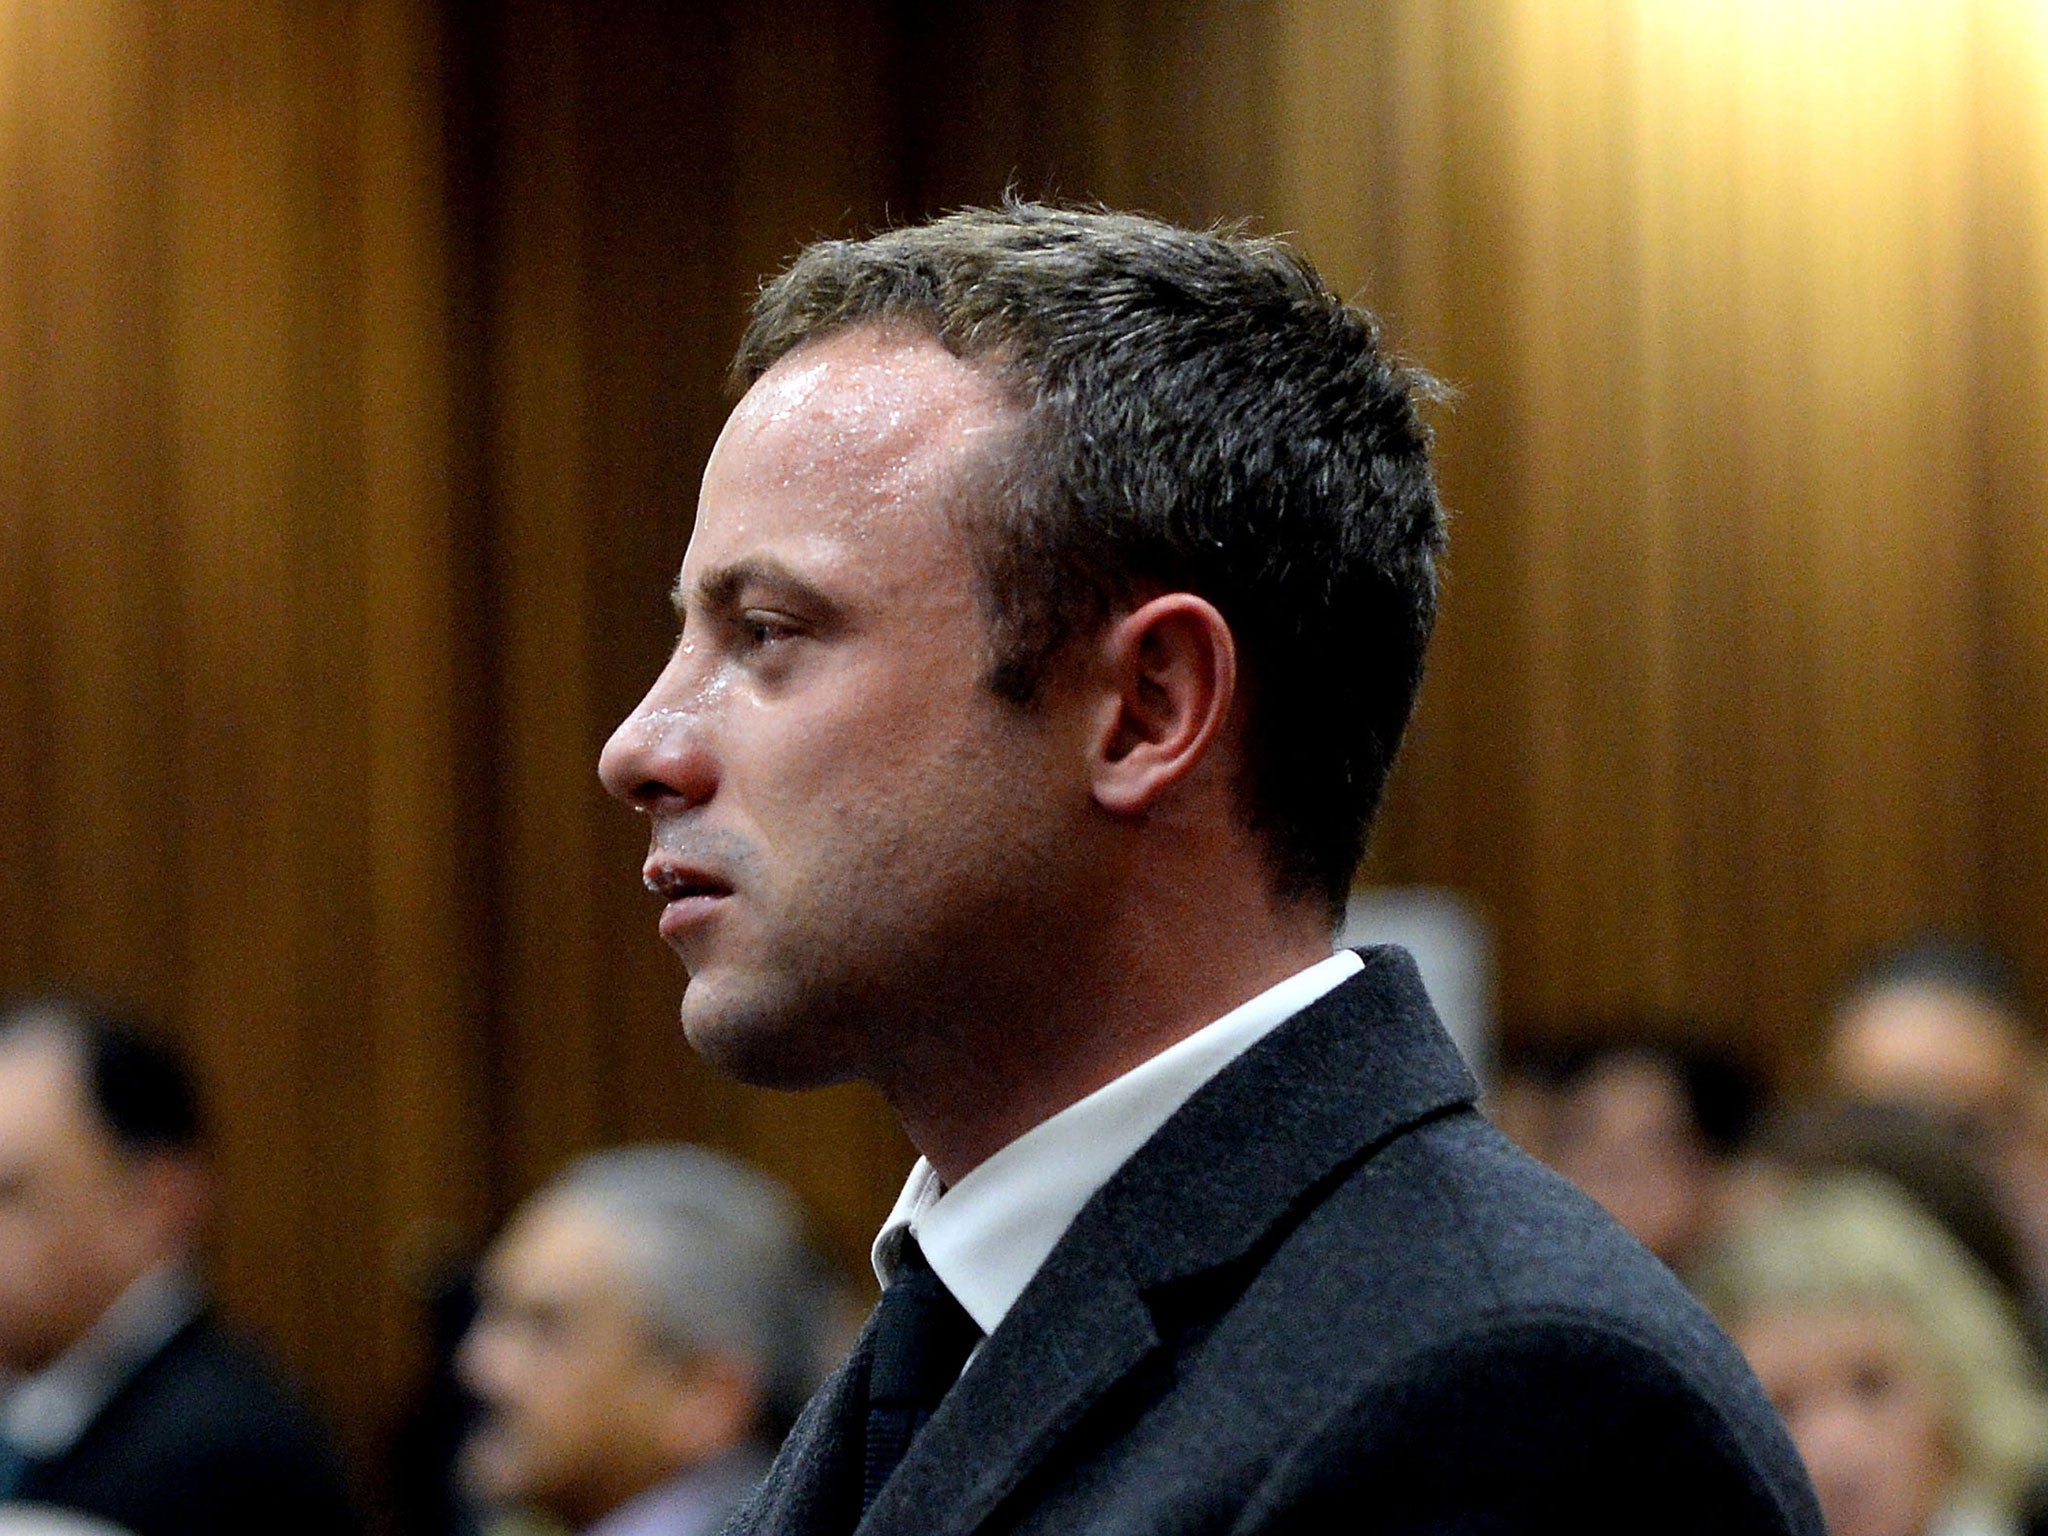 Oscar Pistorius cries as he listens to cross questioning about the events surrounding the shooting death of his girlfriend Reeva Steenkamp, in court during his trial in Pretoria